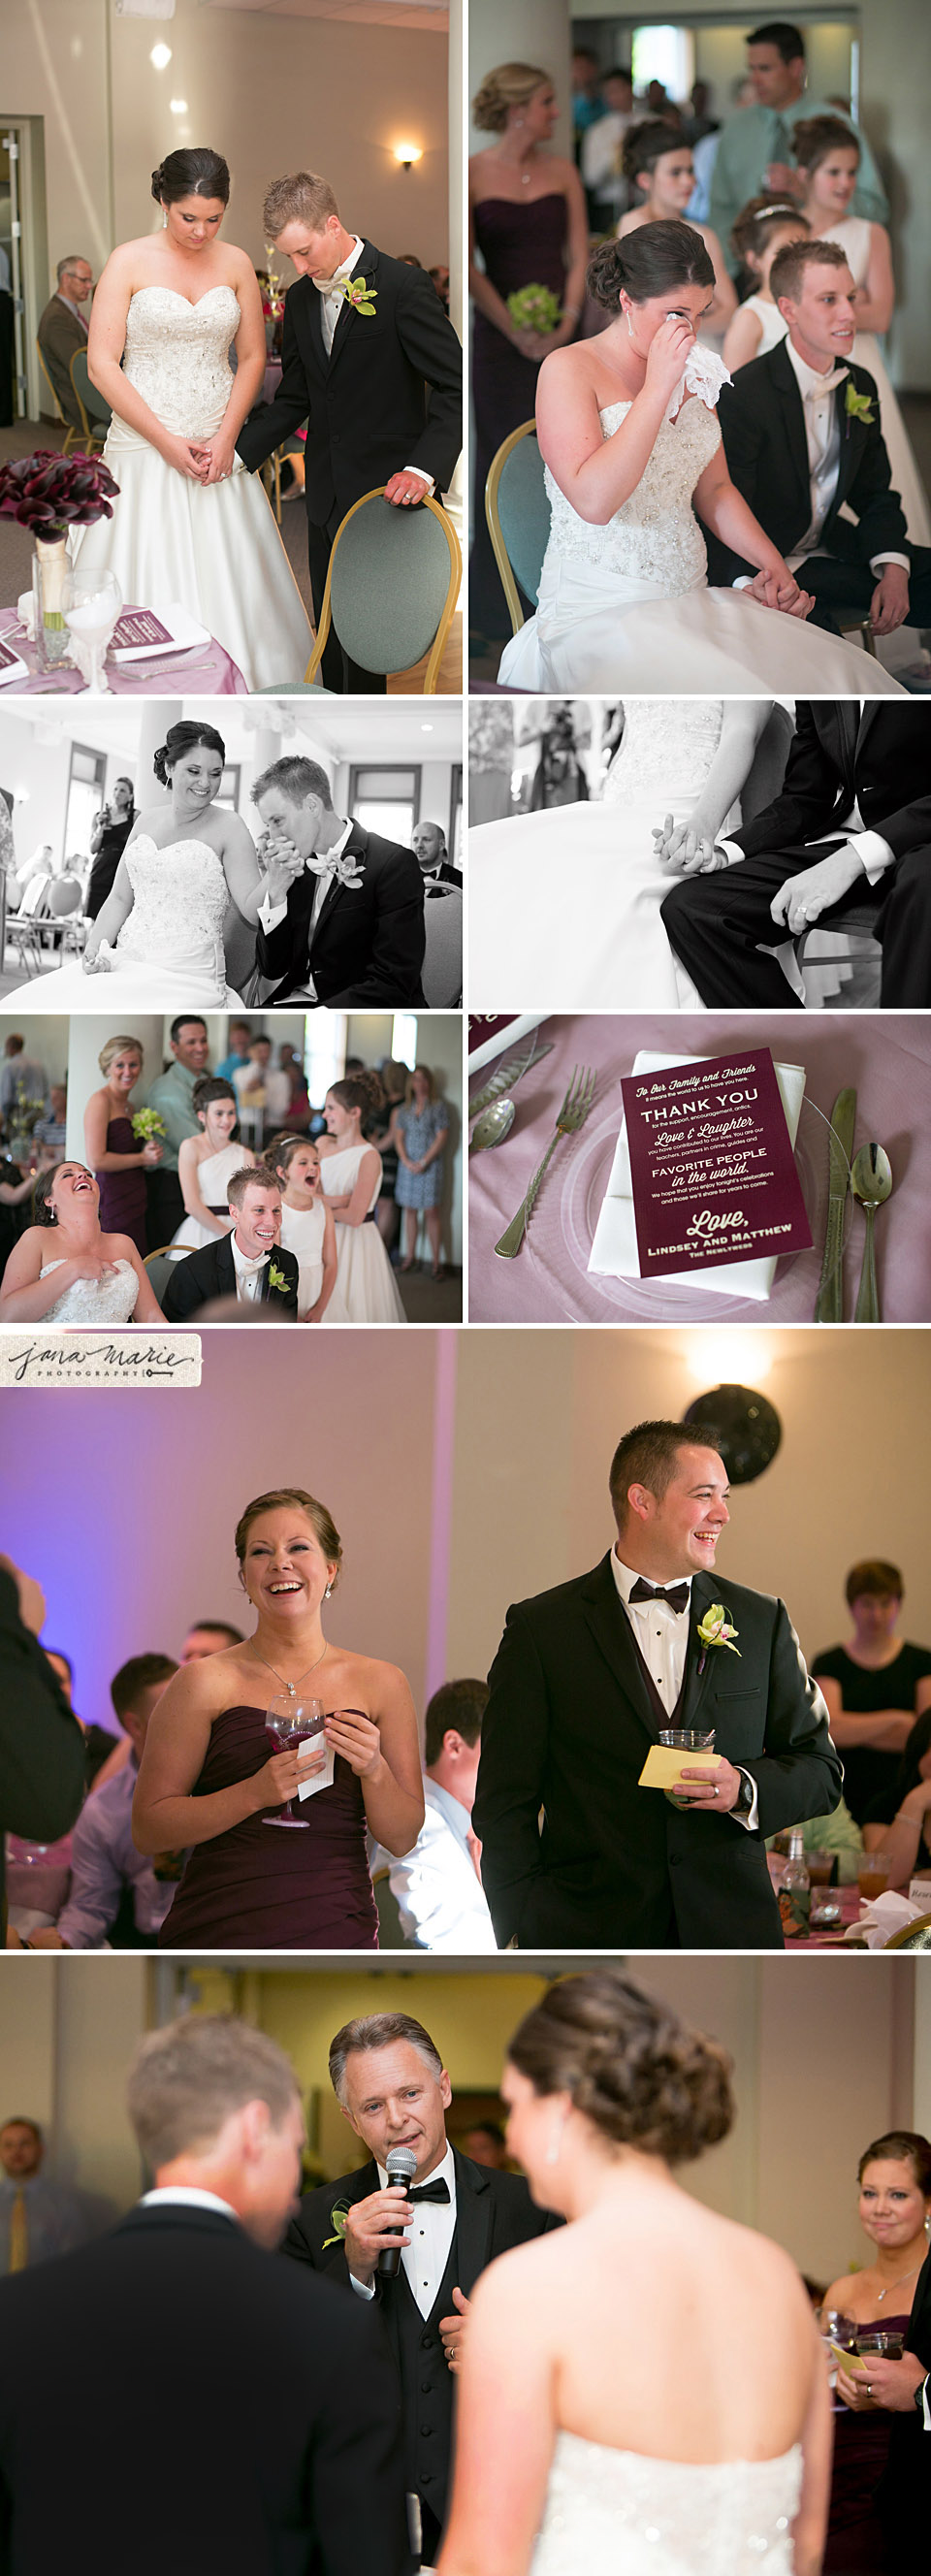 Best man toasts, maid of honor speech, father daughter dance, emotional speeches, Jana Marie Photos, Banana Who Booth